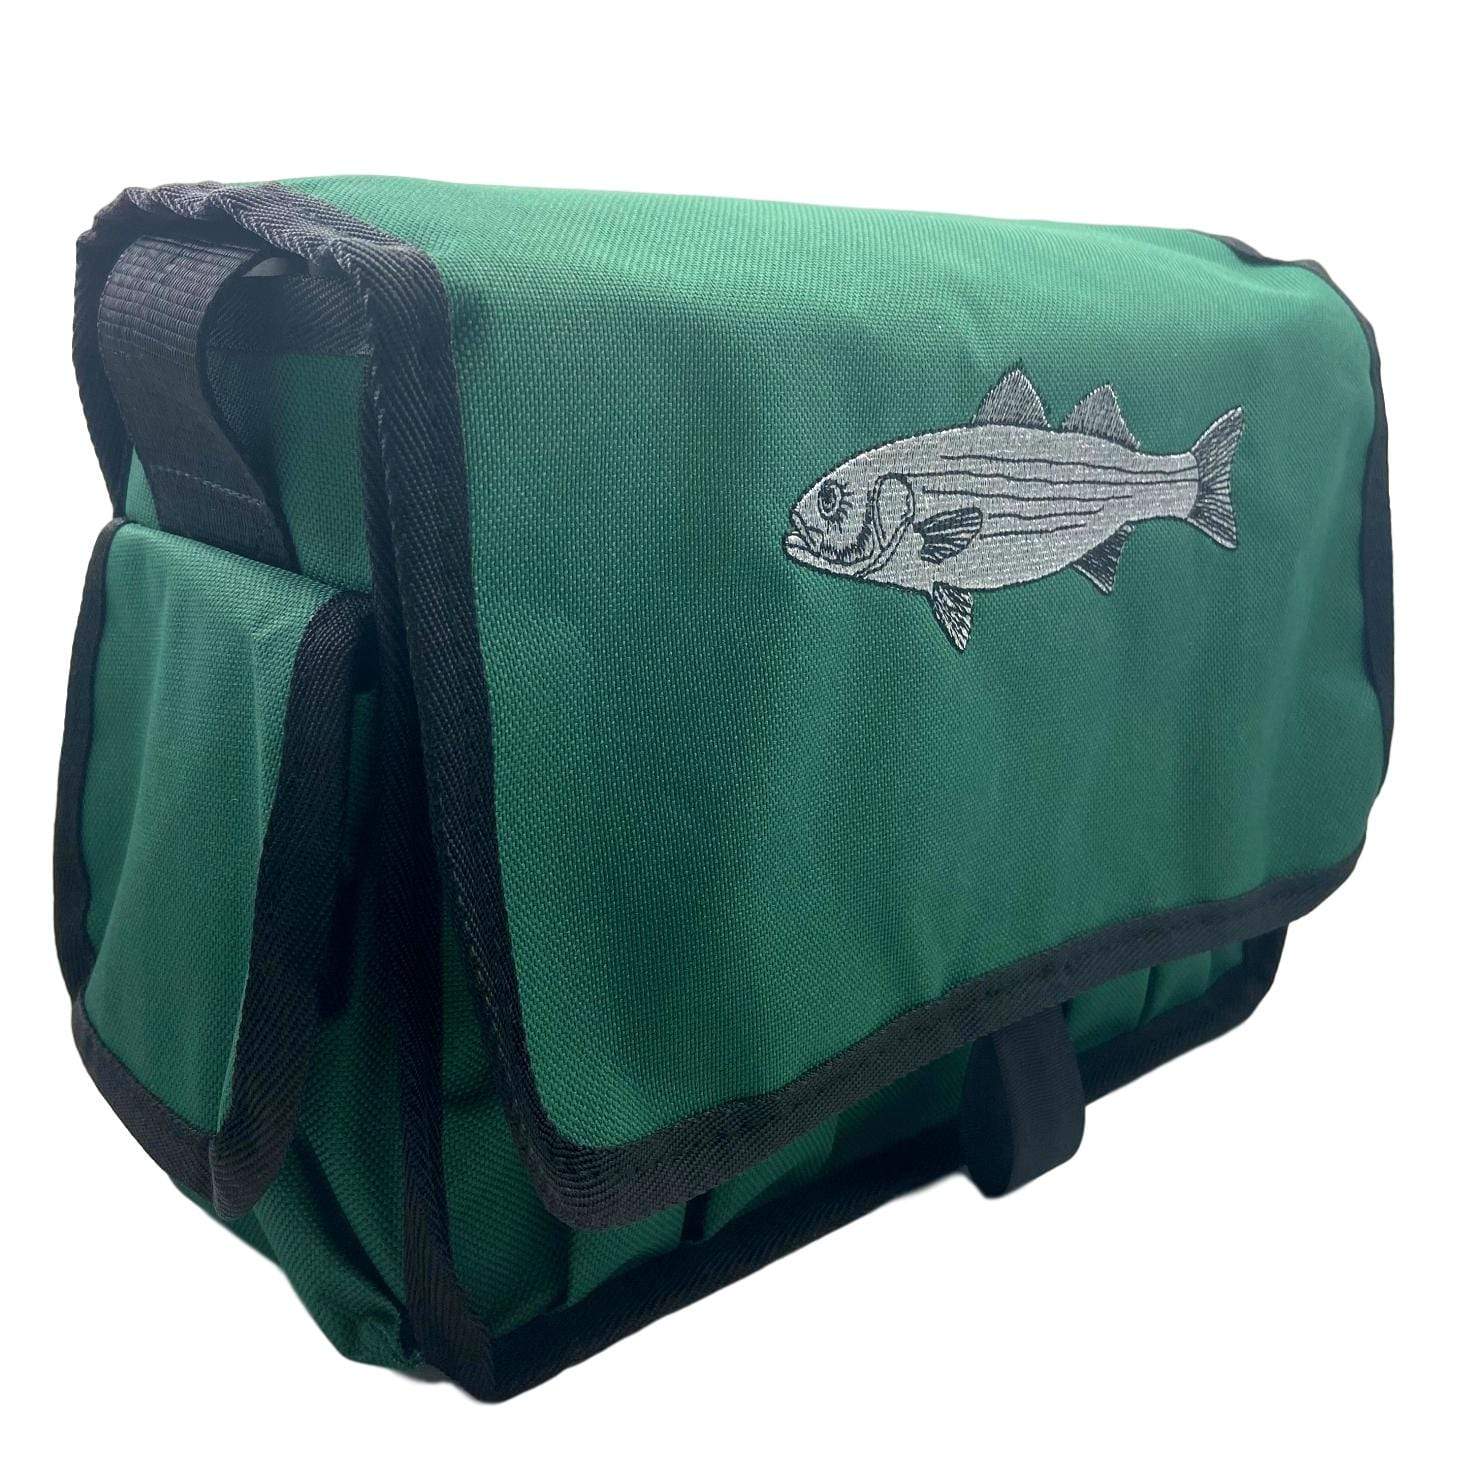 BLUEWAVE SURF BAGS, BAGS, ACCESSORIES, PRODUCT